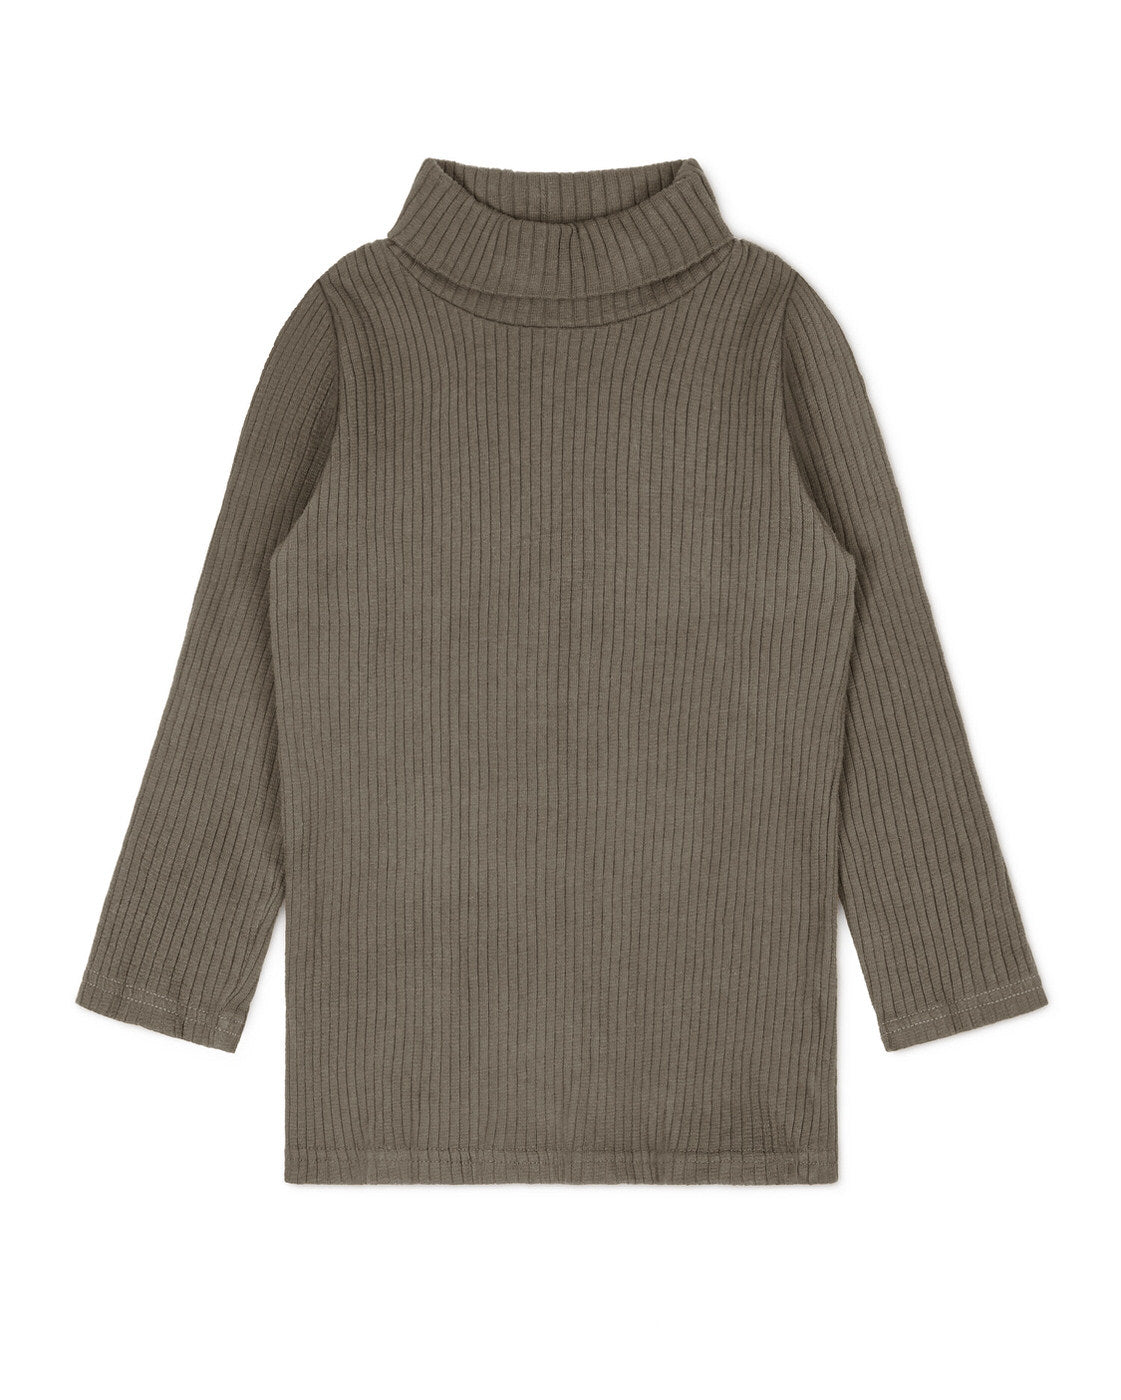 Olive green turtleneck sweater made from organic cotton by Matona